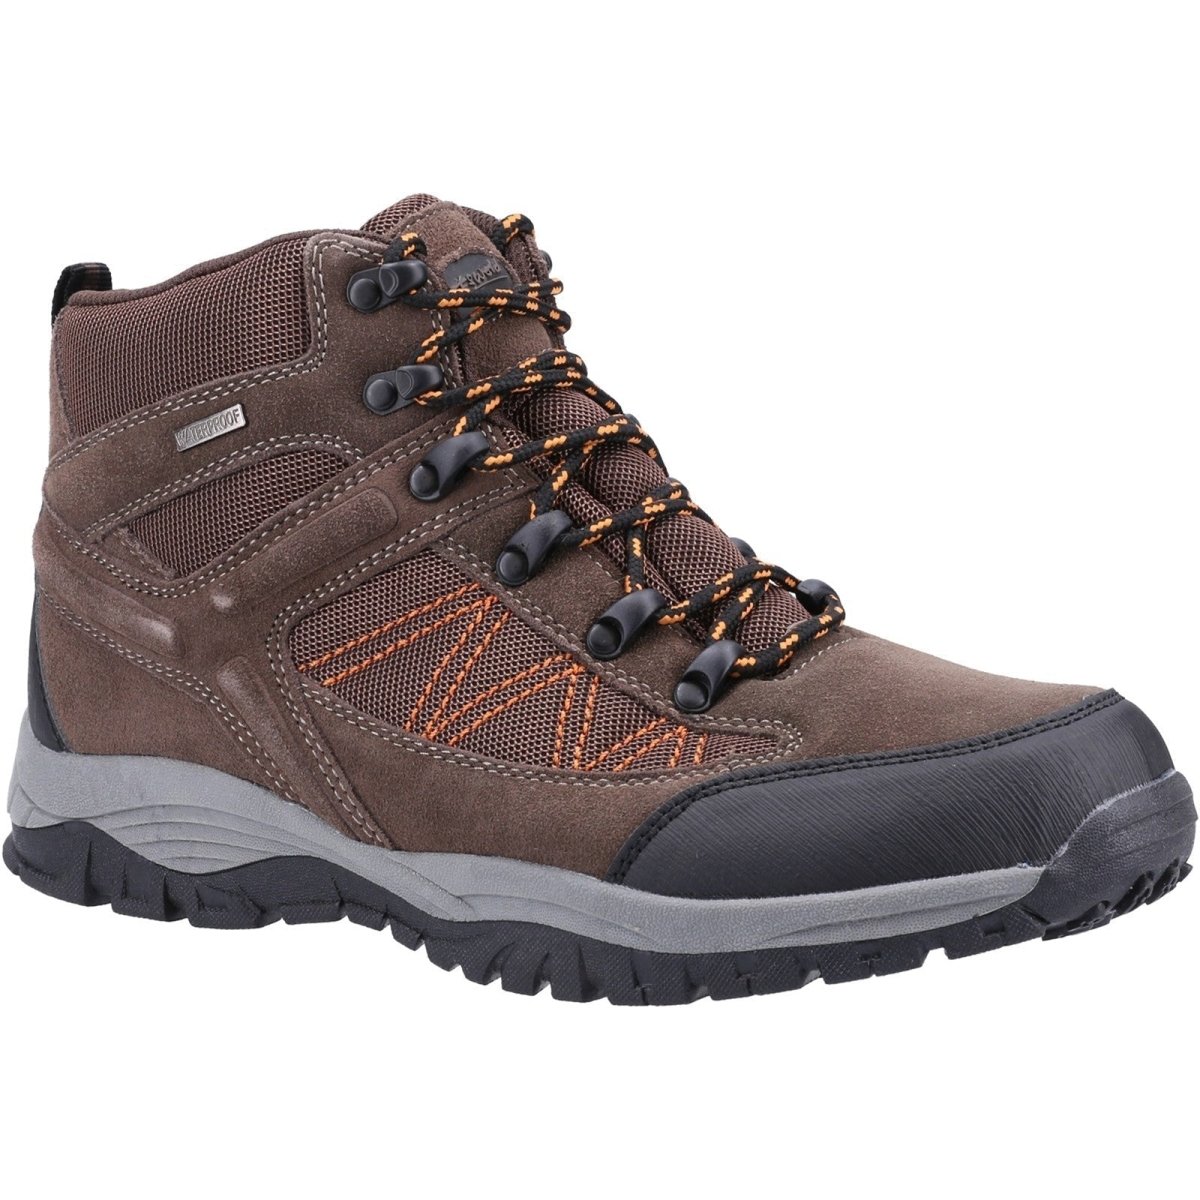 Cotswold Maisemore Mens Hiking Boot - Shoe Store Direct